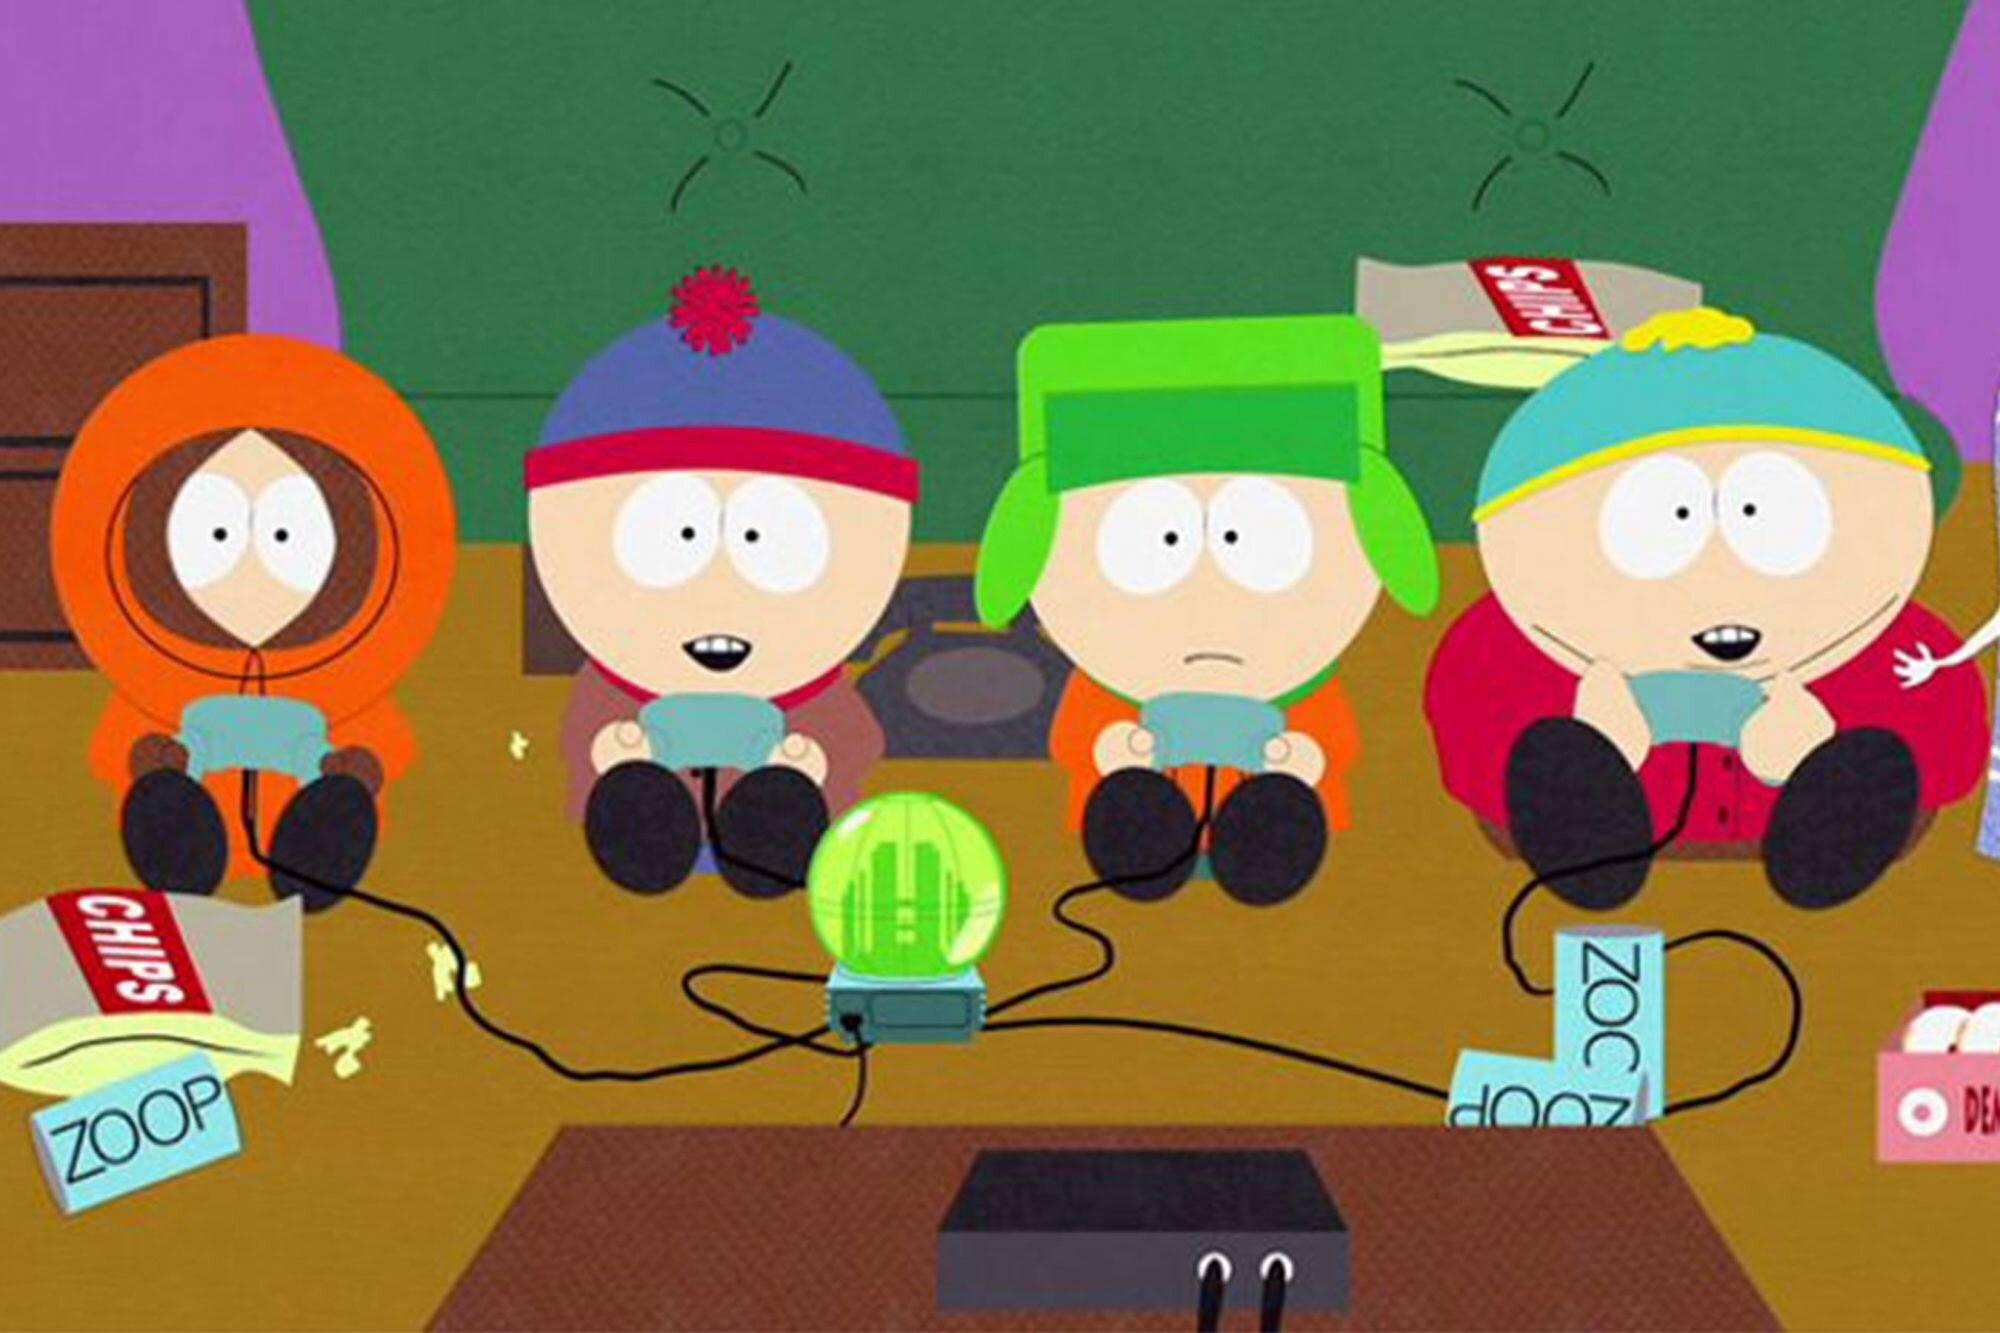 How to Watch ‘South Park’ Season 25 Premiere Without Cable on February 2